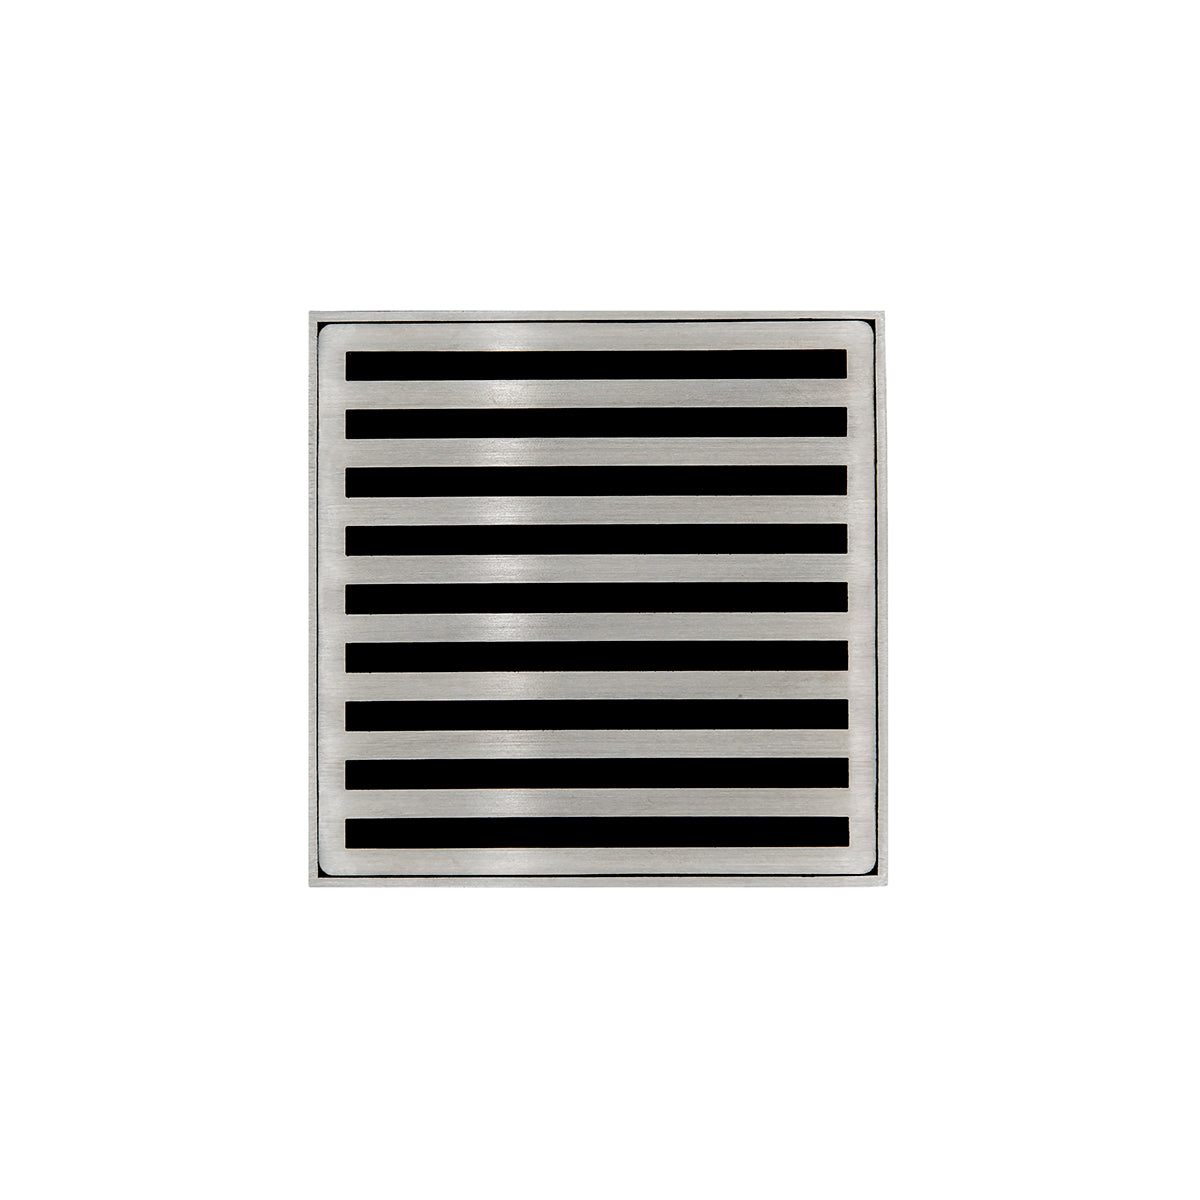 Infinity Drain 4" x 4" NDB 4 Premium Center Drain Kit with Lines Pattern Decorative Plate with Stainless Steel Bonded Flange Drain Body, 2" No Hub Outlet